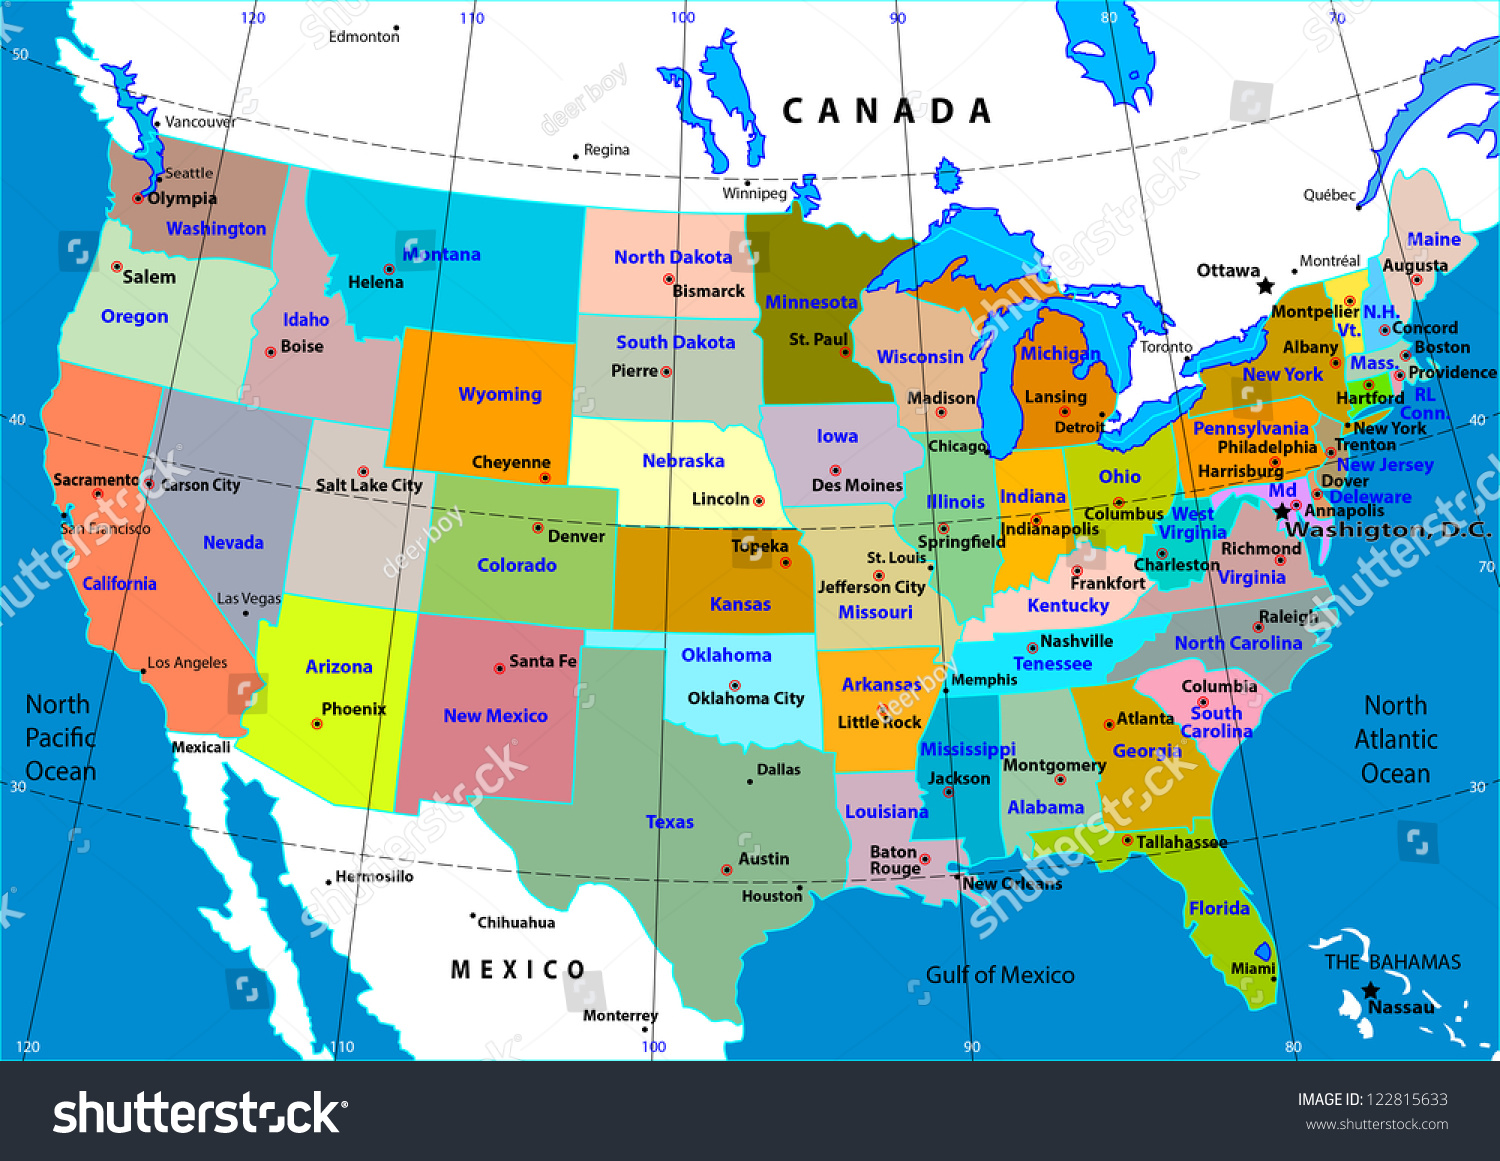 usa map with states and capital cities Colorful Usa Map States Capital Cities Stock Vector Royalty Free usa map with states and capital cities